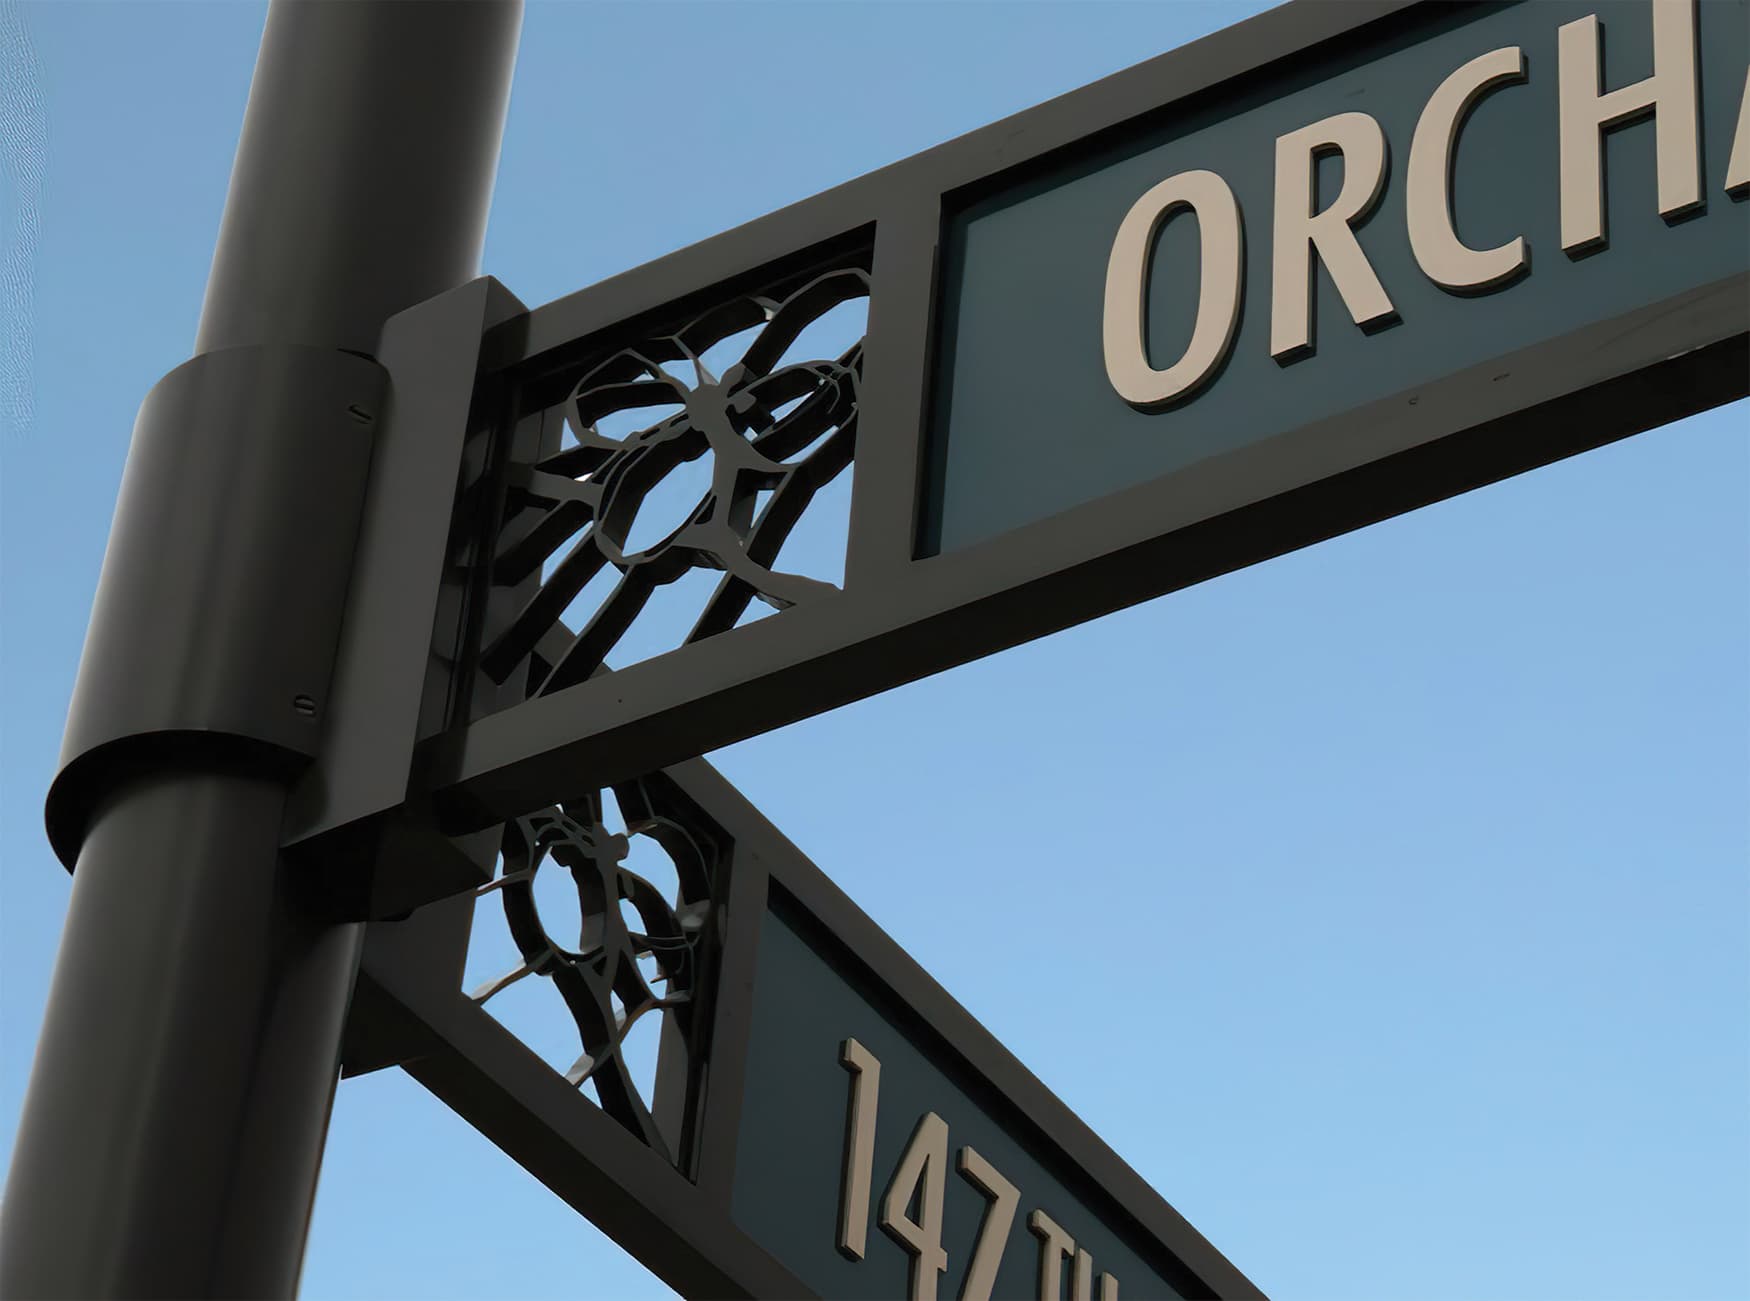 RSM Design worked to create a wayfinding system and Environmental Graphic Design program for The Orchard, a mixed-use retail project in Westminster, Colorado. Directional Wayfinding Signage. Civic Design.